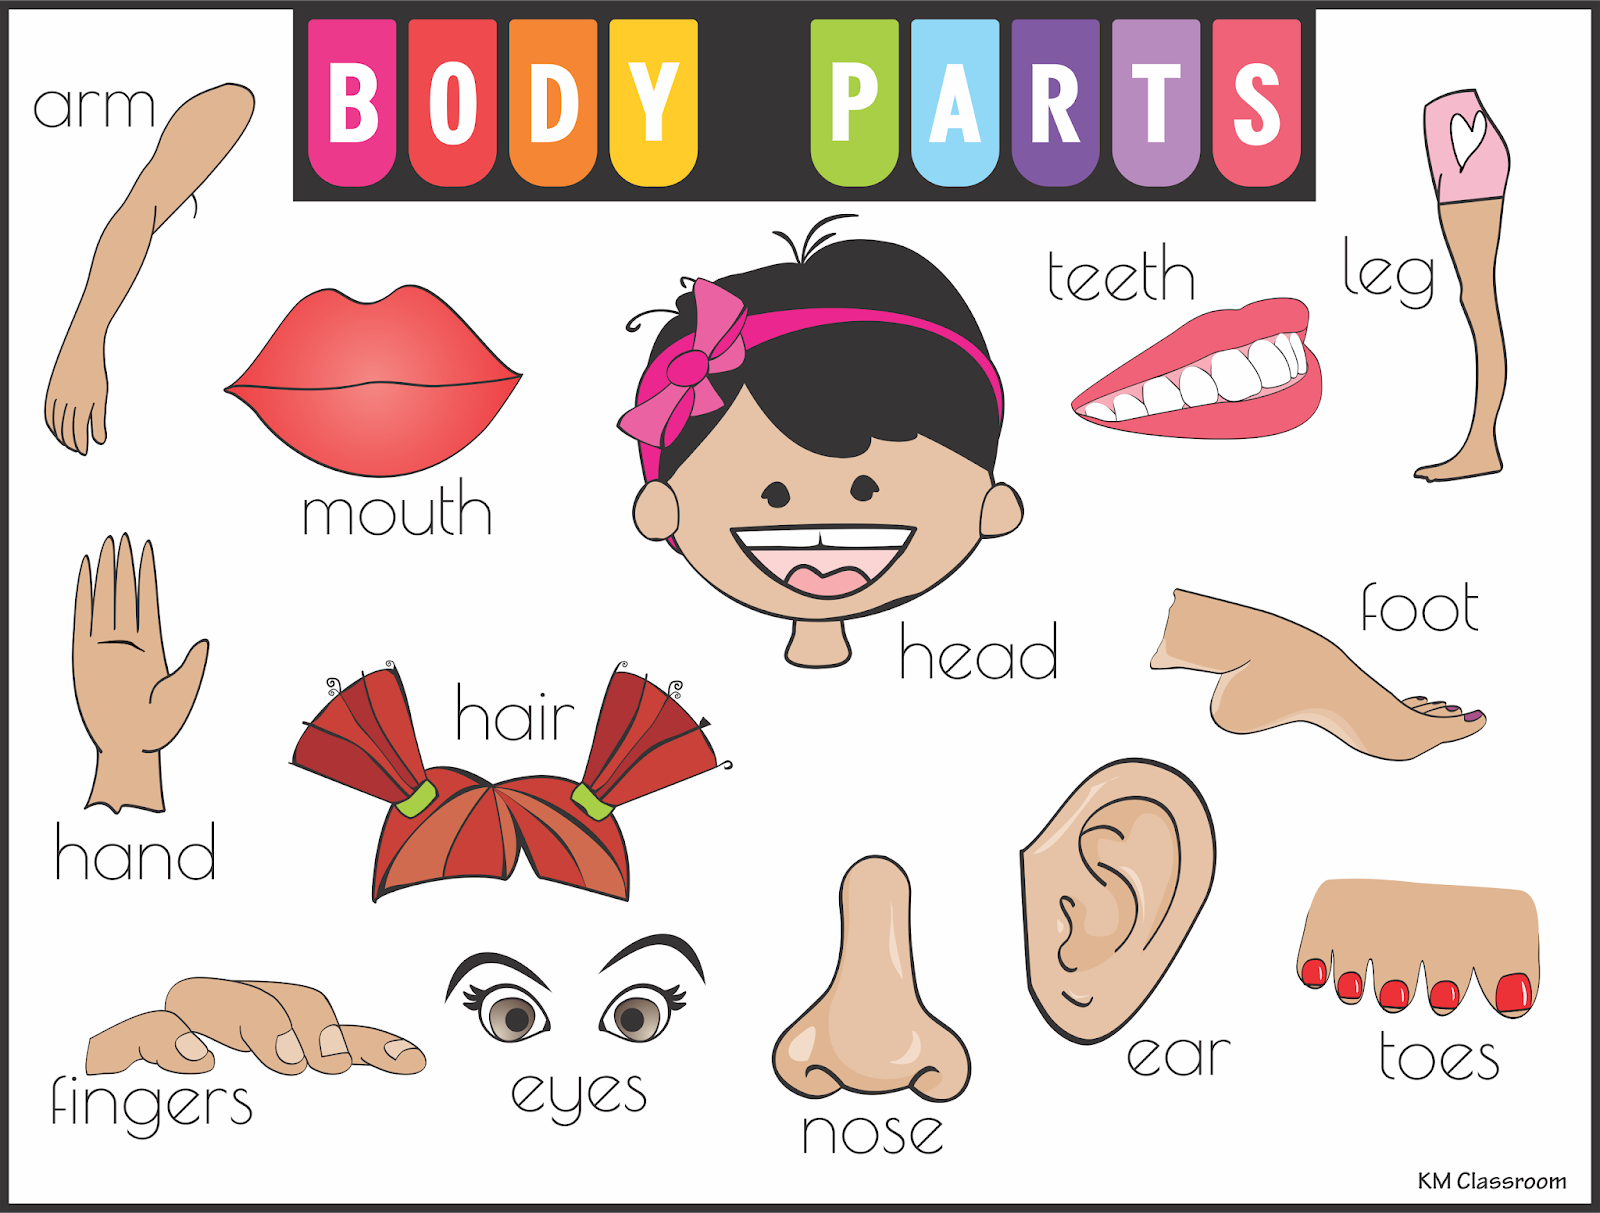 km-classroom-body-parts-flashcards-word-cards